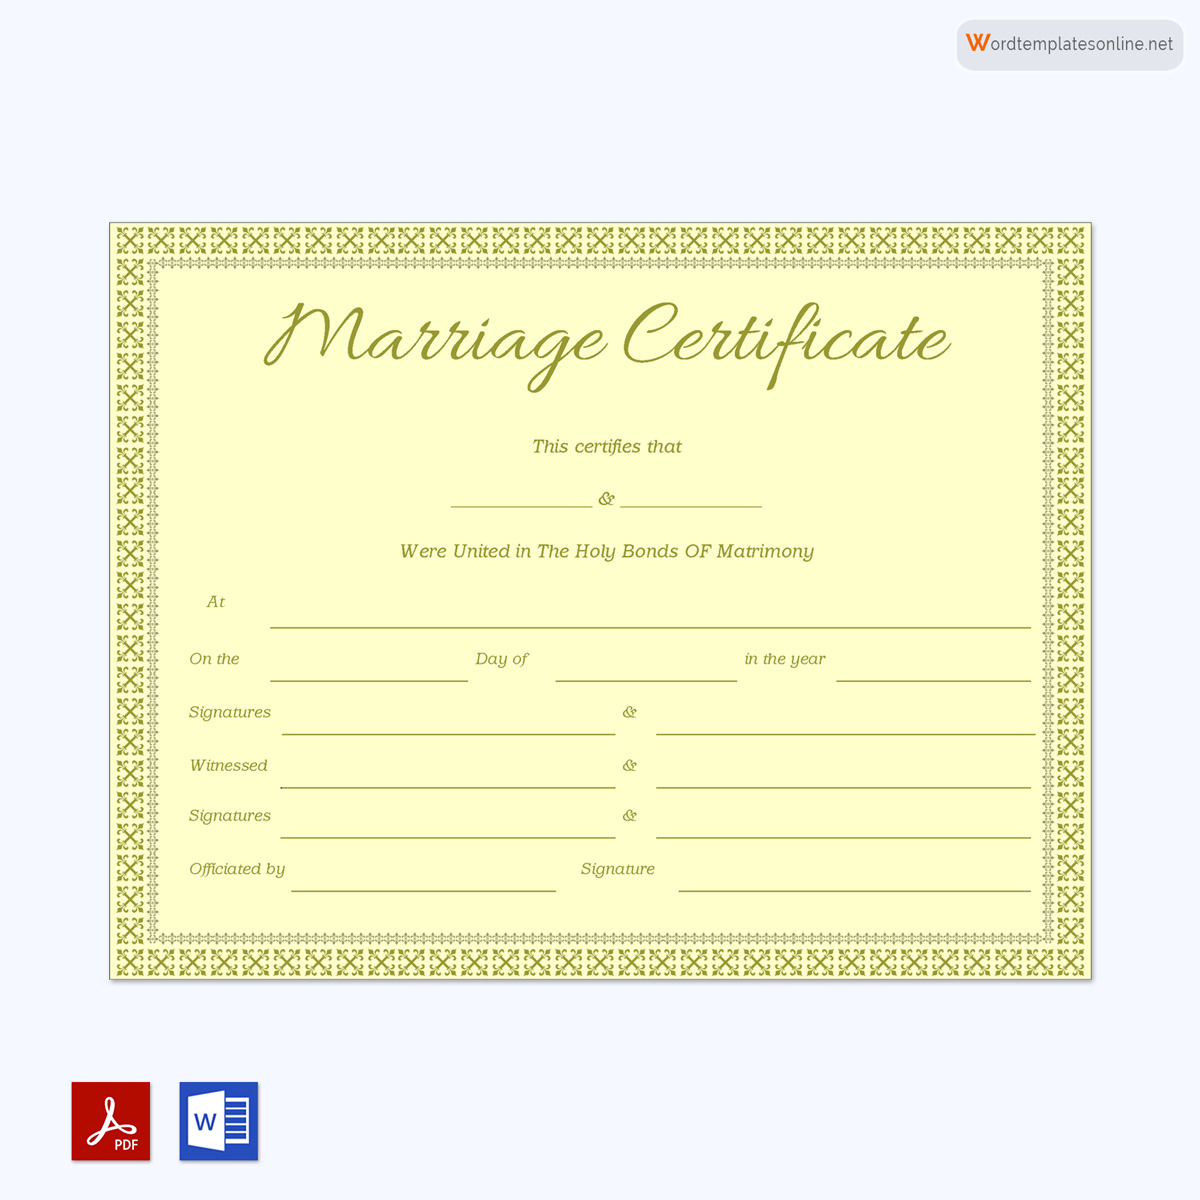  marriage certificate pdf download 128